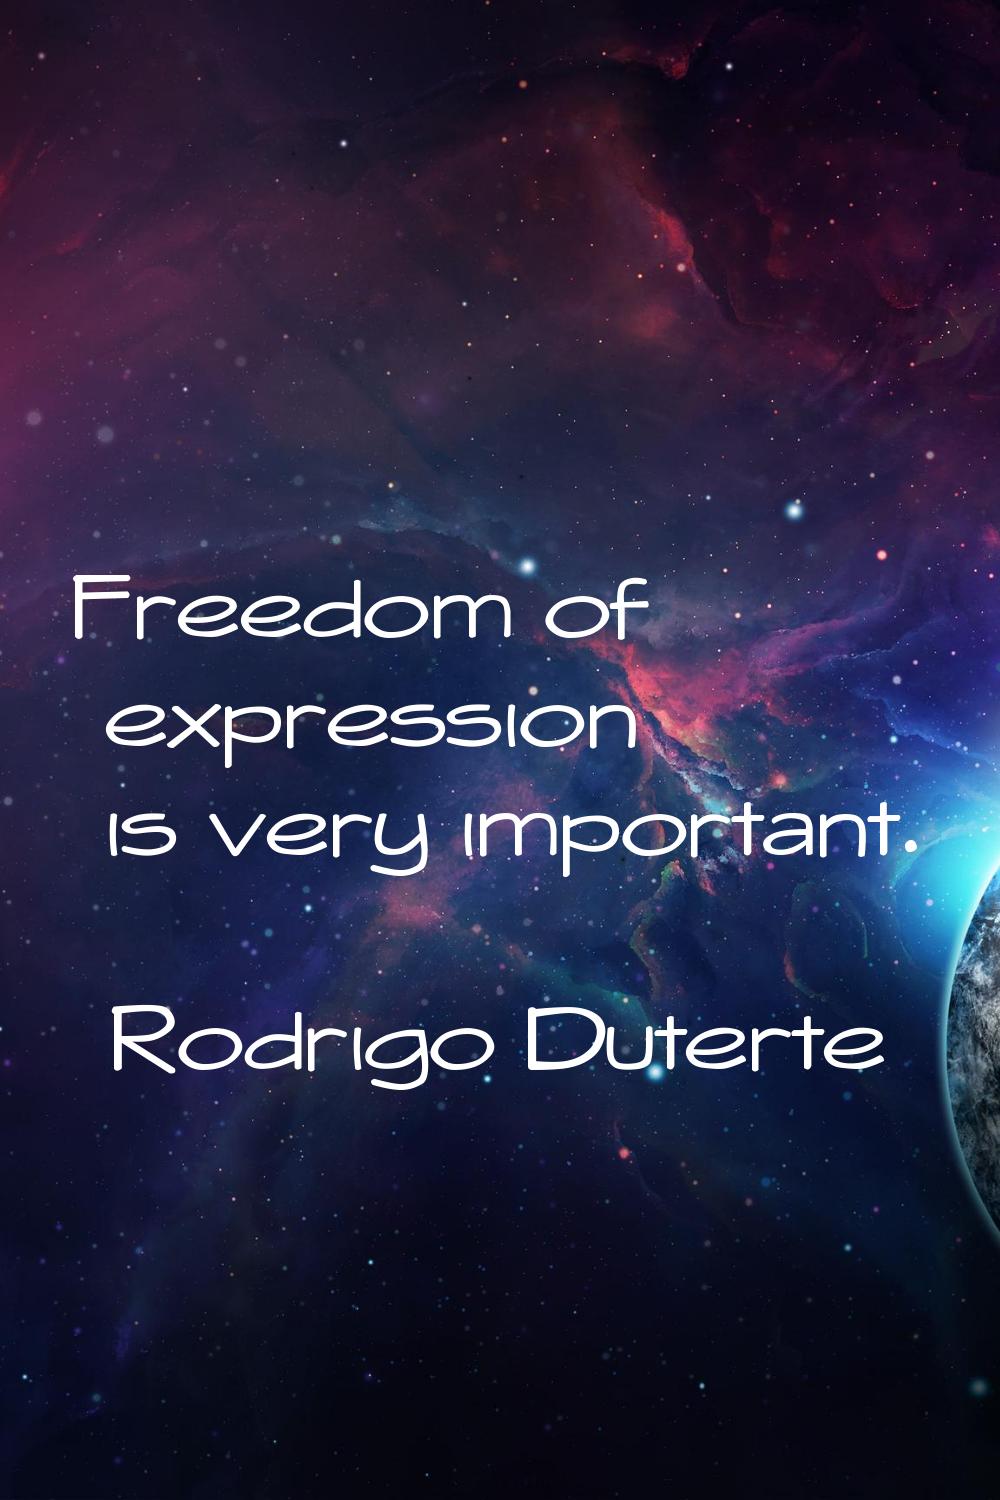 Freedom of expression is very important.